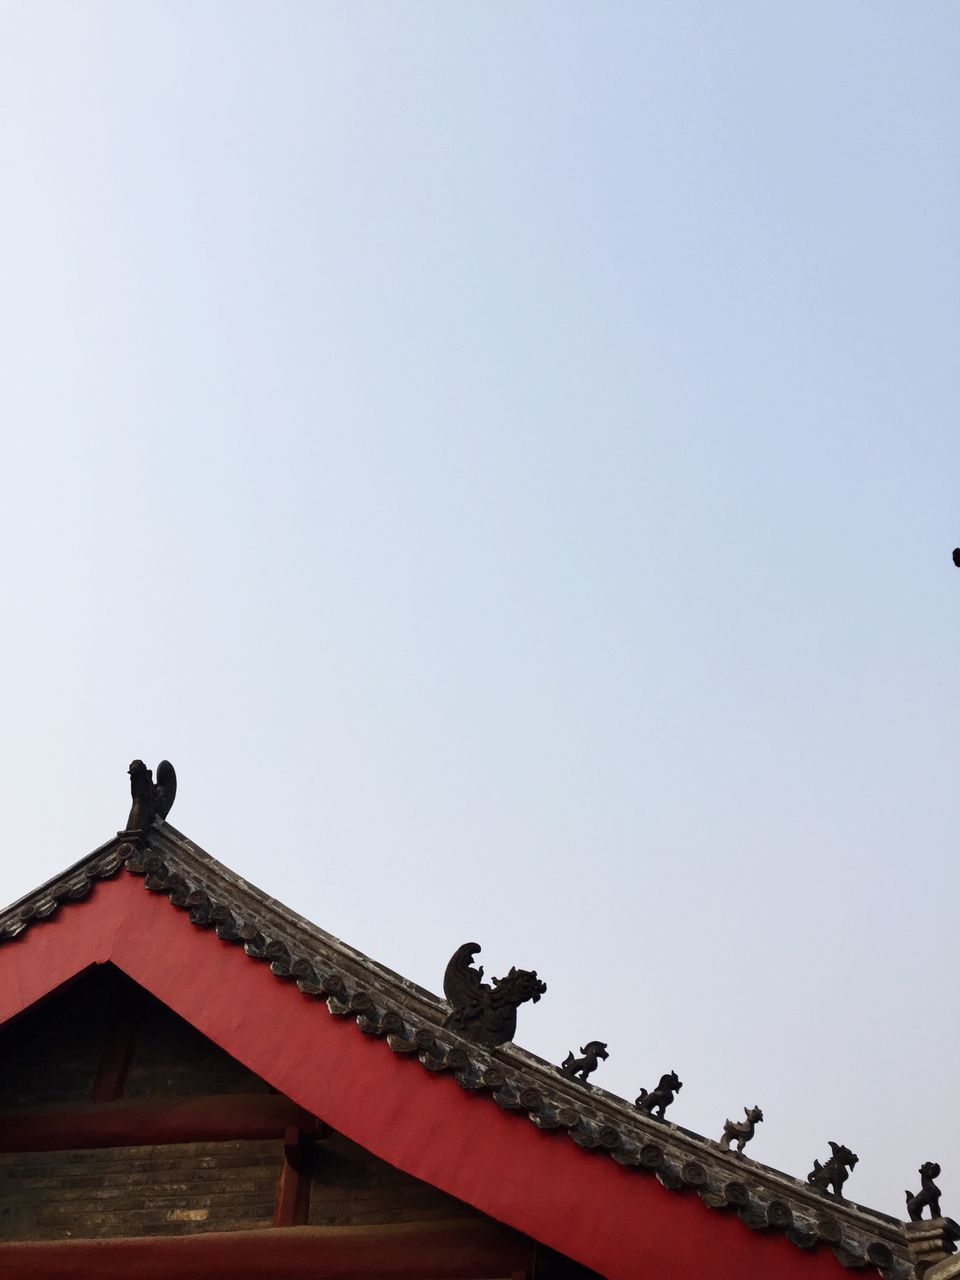 bird, animal themes, animals in the wild, low angle view, wildlife, clear sky, perching, copy space, built structure, architecture, flying, building exterior, one animal, two animals, pigeon, roof, sky, three animals, avian, outdoors